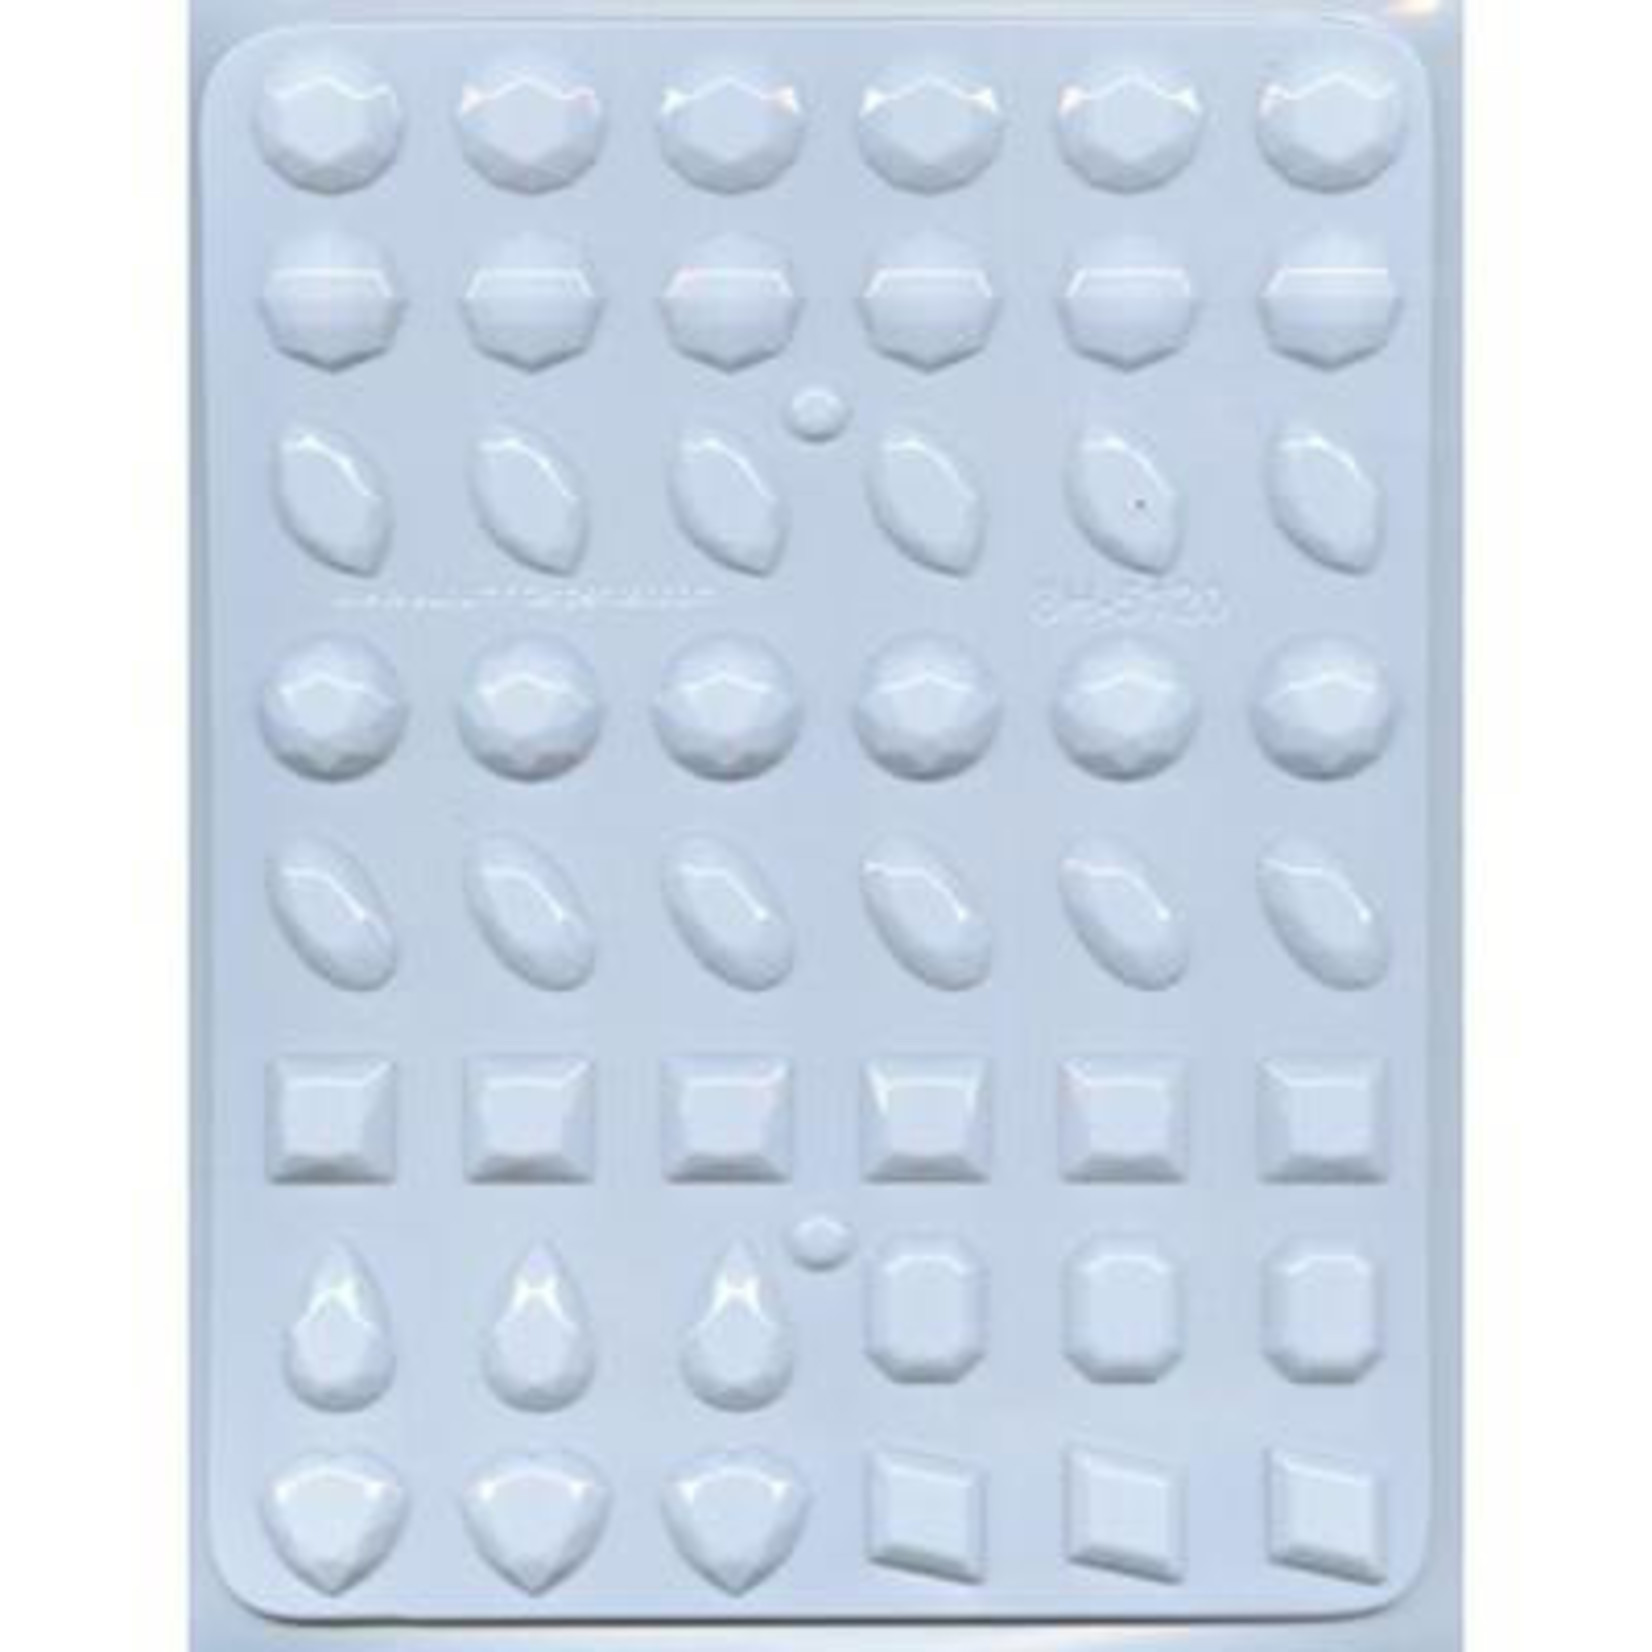 8H-5120 Large GEMs Assortment Hard Candy Mold, 1/2 - 1 - The